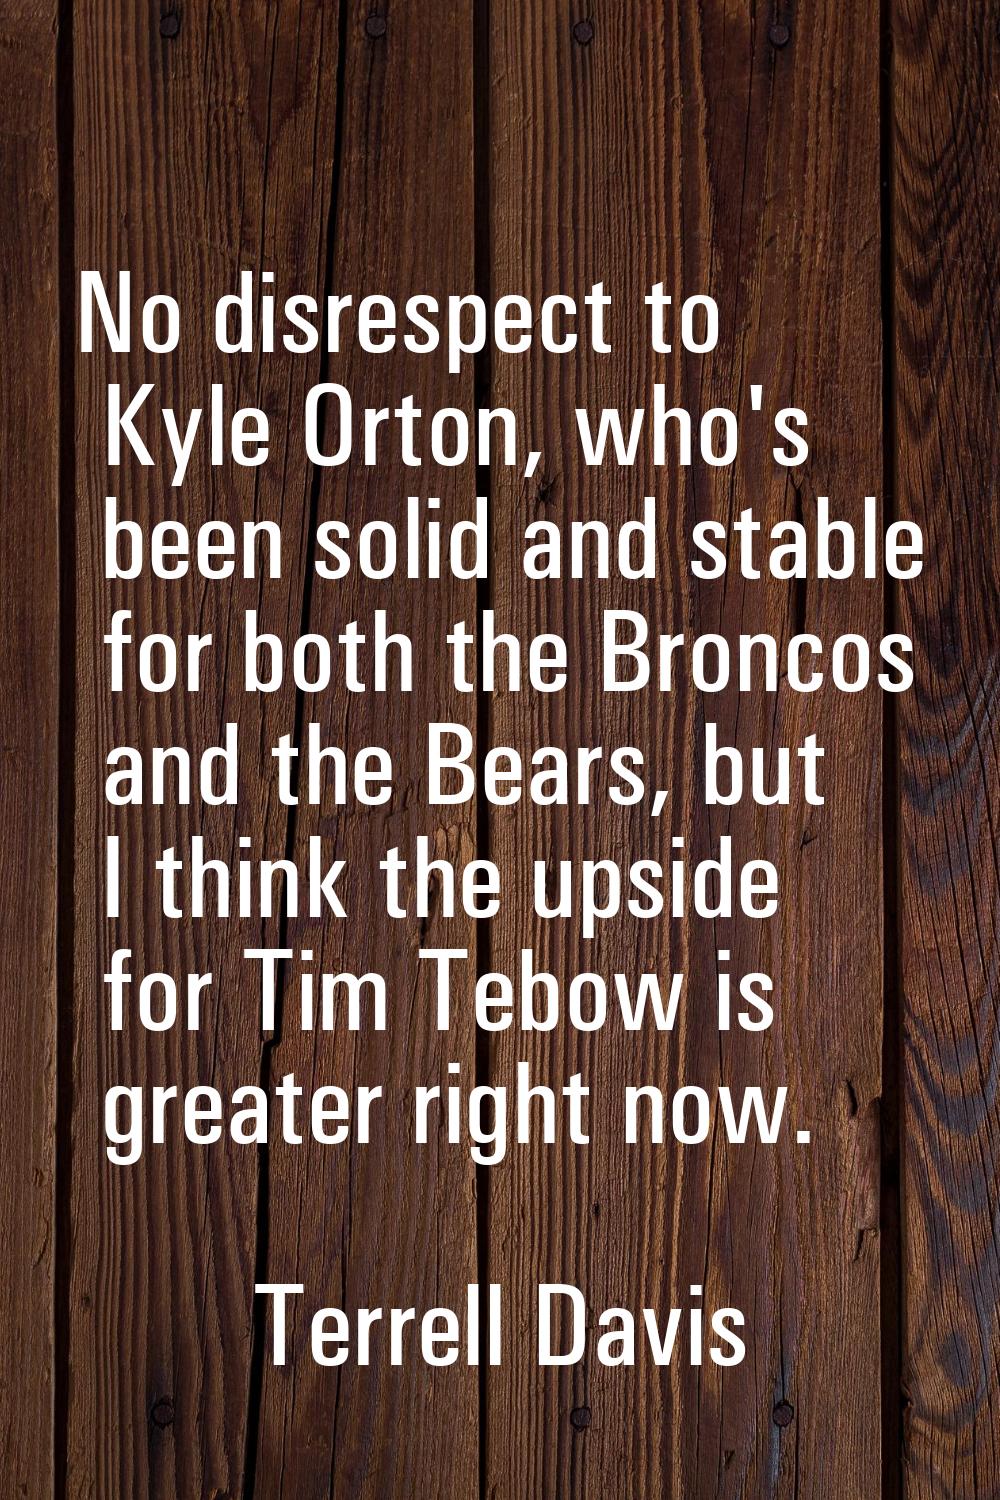 No disrespect to Kyle Orton, who's been solid and stable for both the Broncos and the Bears, but I 